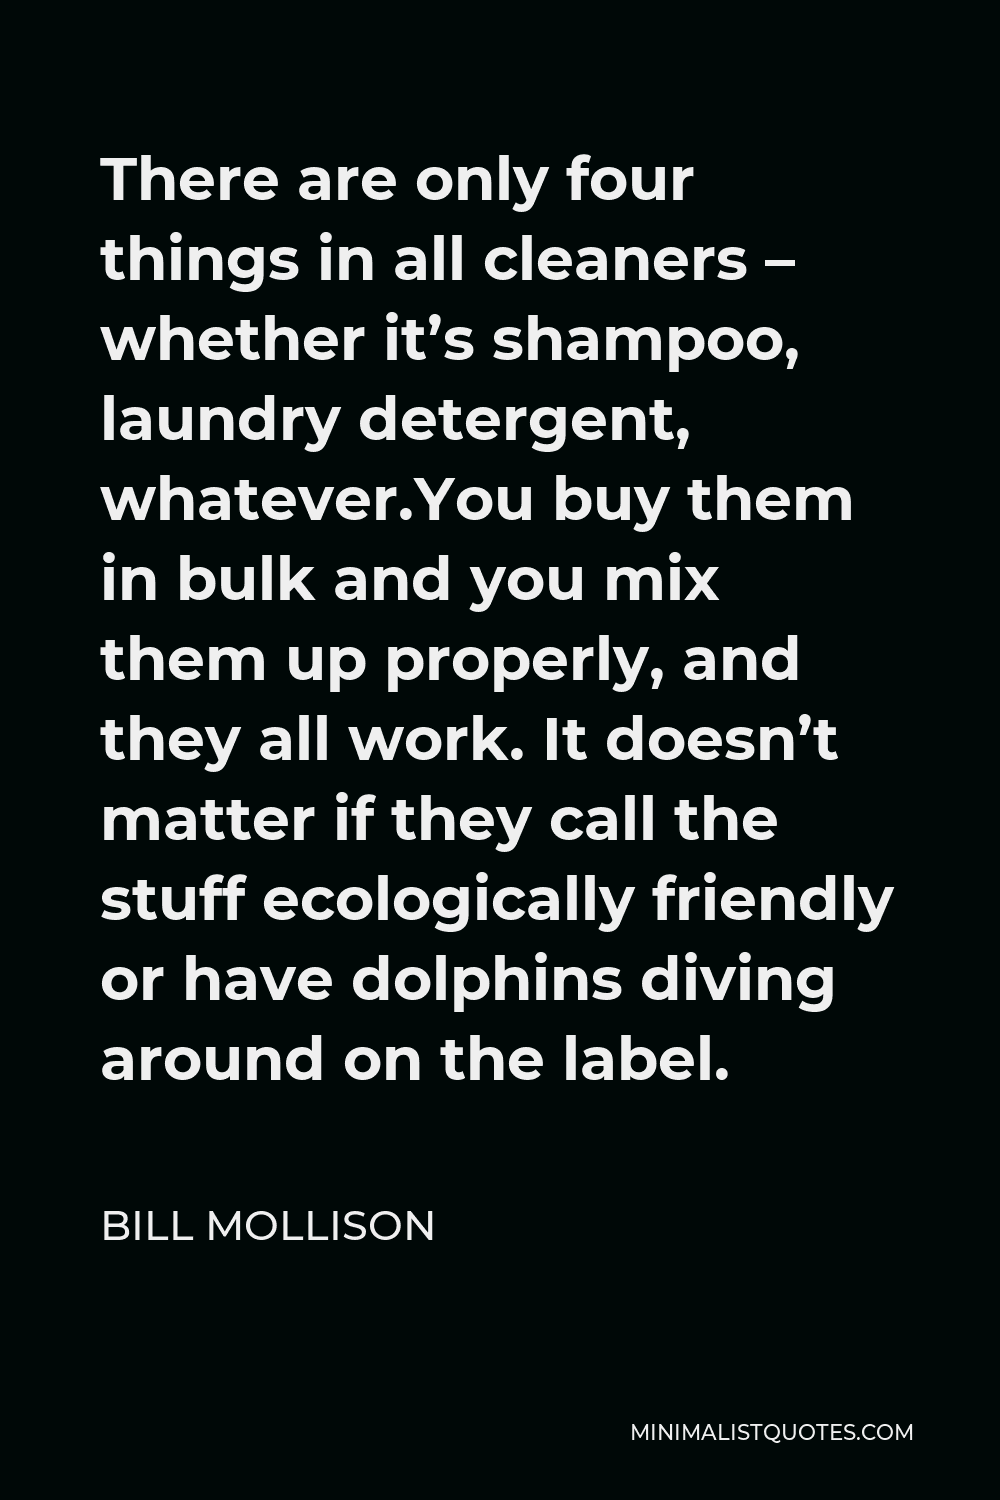 Bill Mollison Quote - There are only four things in all cleaners – whether it’s shampoo, laundry detergent, whatever.You buy them in bulk and you mix them up properly, and they all work. It doesn’t matter if they call the stuff ecologically friendly or have dolphins diving around on the label.